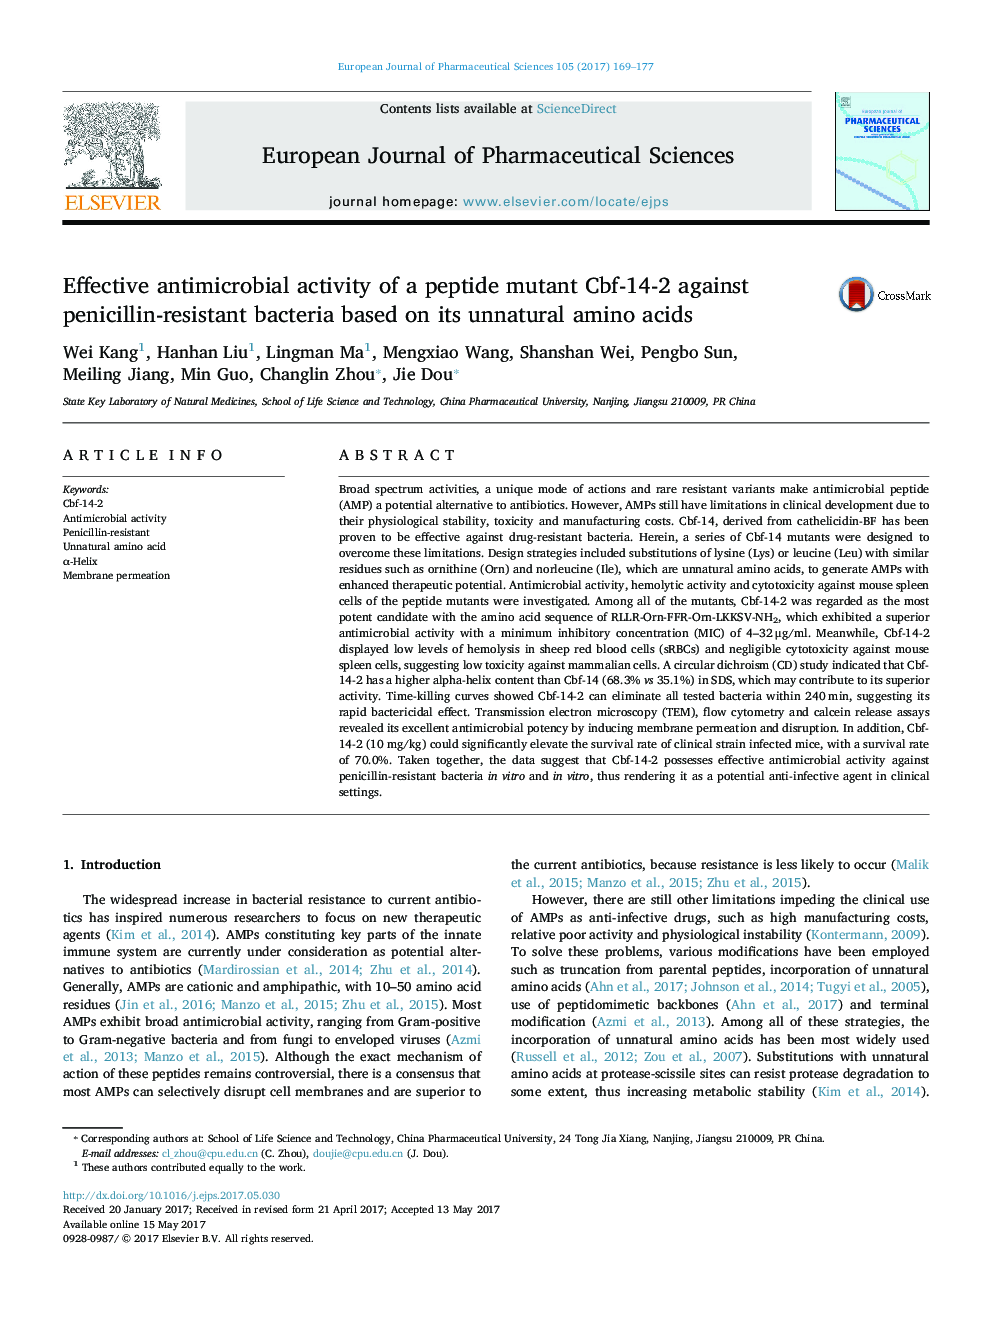 Effective antimicrobial activity of a peptide mutant Cbf-14-2 against penicillin-resistant bacteria based on its unnatural amino acids